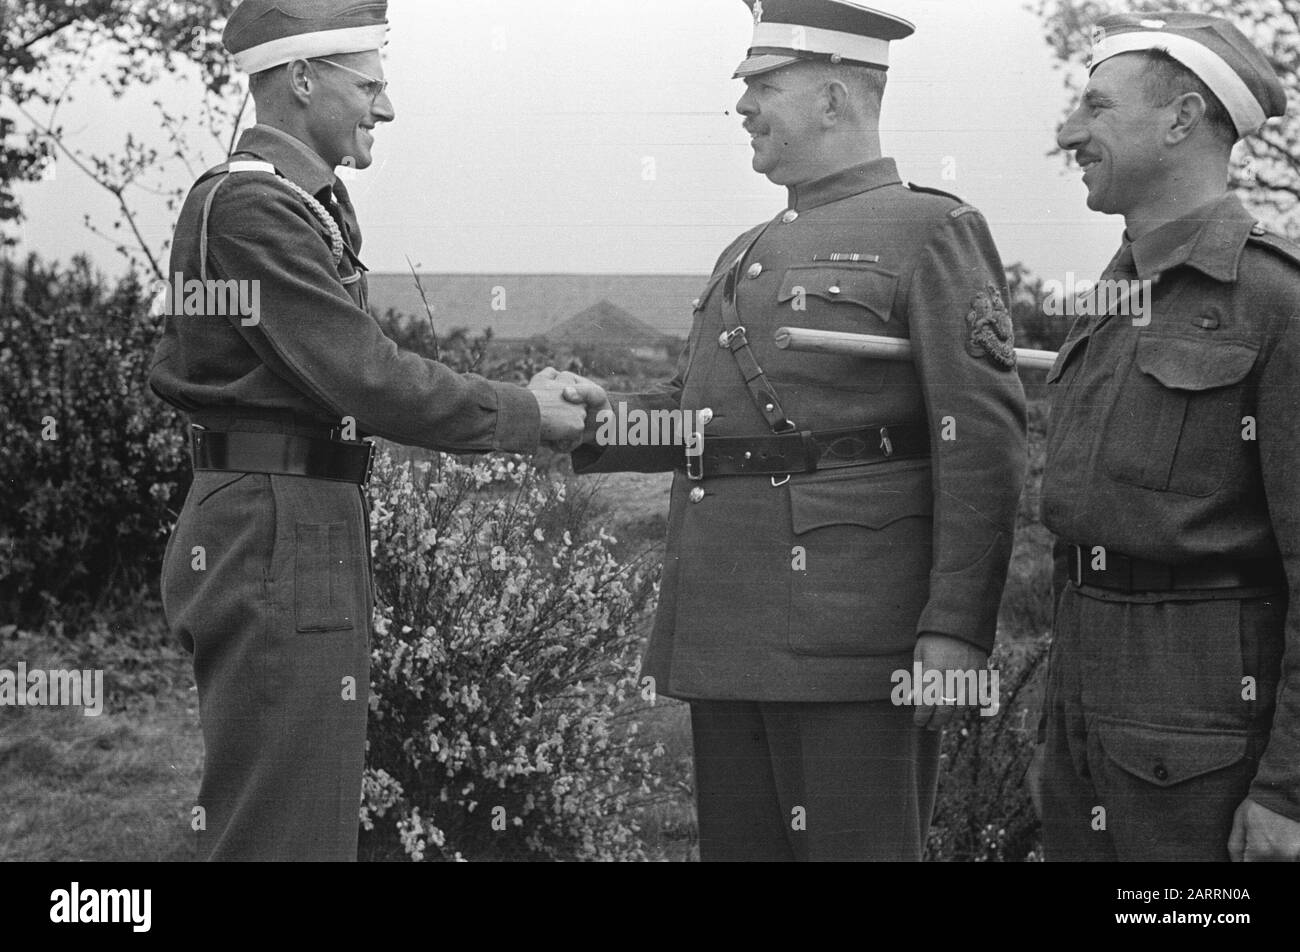 Series Octu-training at Aldershot for Dutch officers, together with British cadets. [Passing out of Dutch Cadets.20 Lt. Biyl congratulated by Sergt-Major on receipt of belt of Honor] Annotation: Probably Lieutenant Axe Date: May 1943 Location: Aldershot, Great Britain Keywords: army, soldiers, trainings, World War II Stock Photo